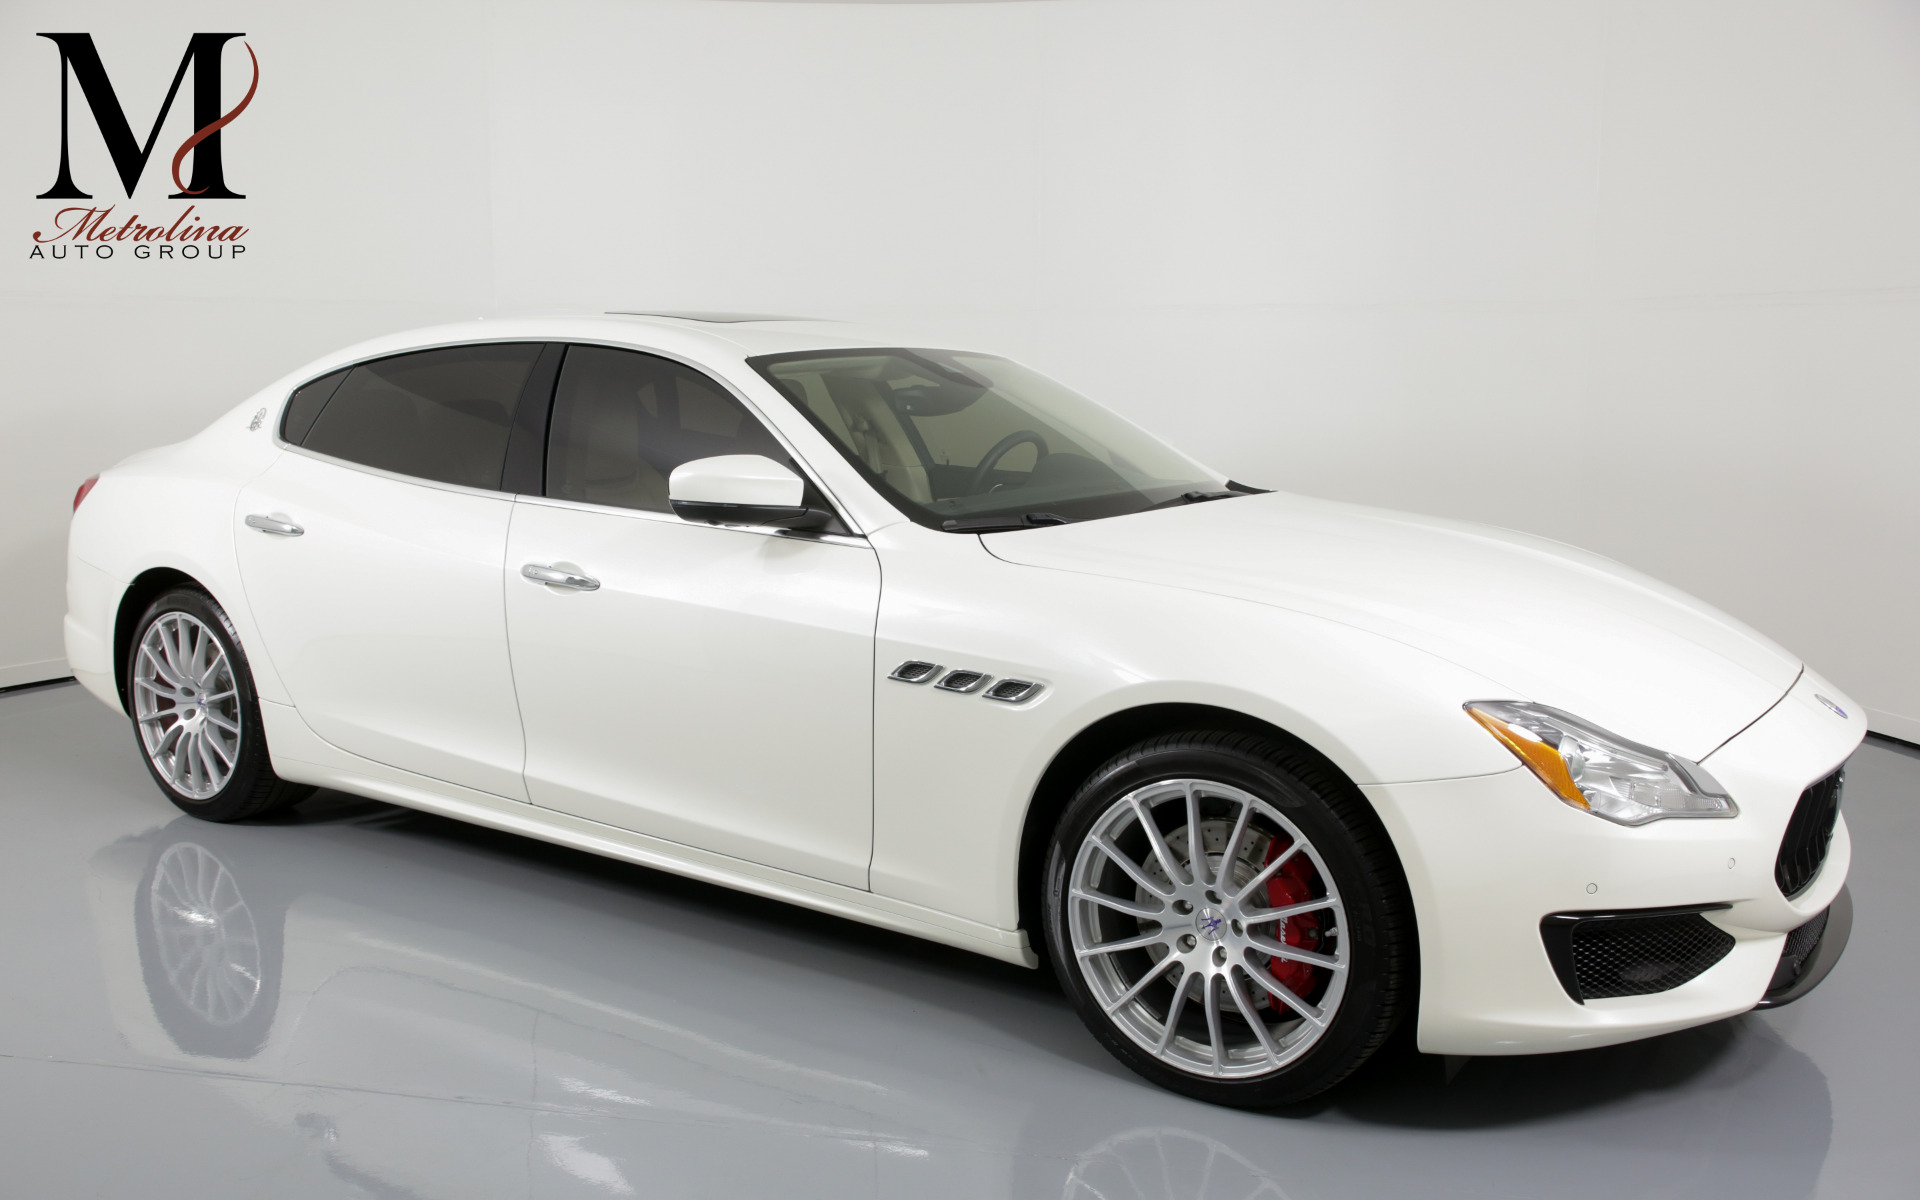 Used 2017 Maserati Quattroporte S GranSport for sale Sold at Metrolina Auto Group in Charlotte NC 28217 - 1